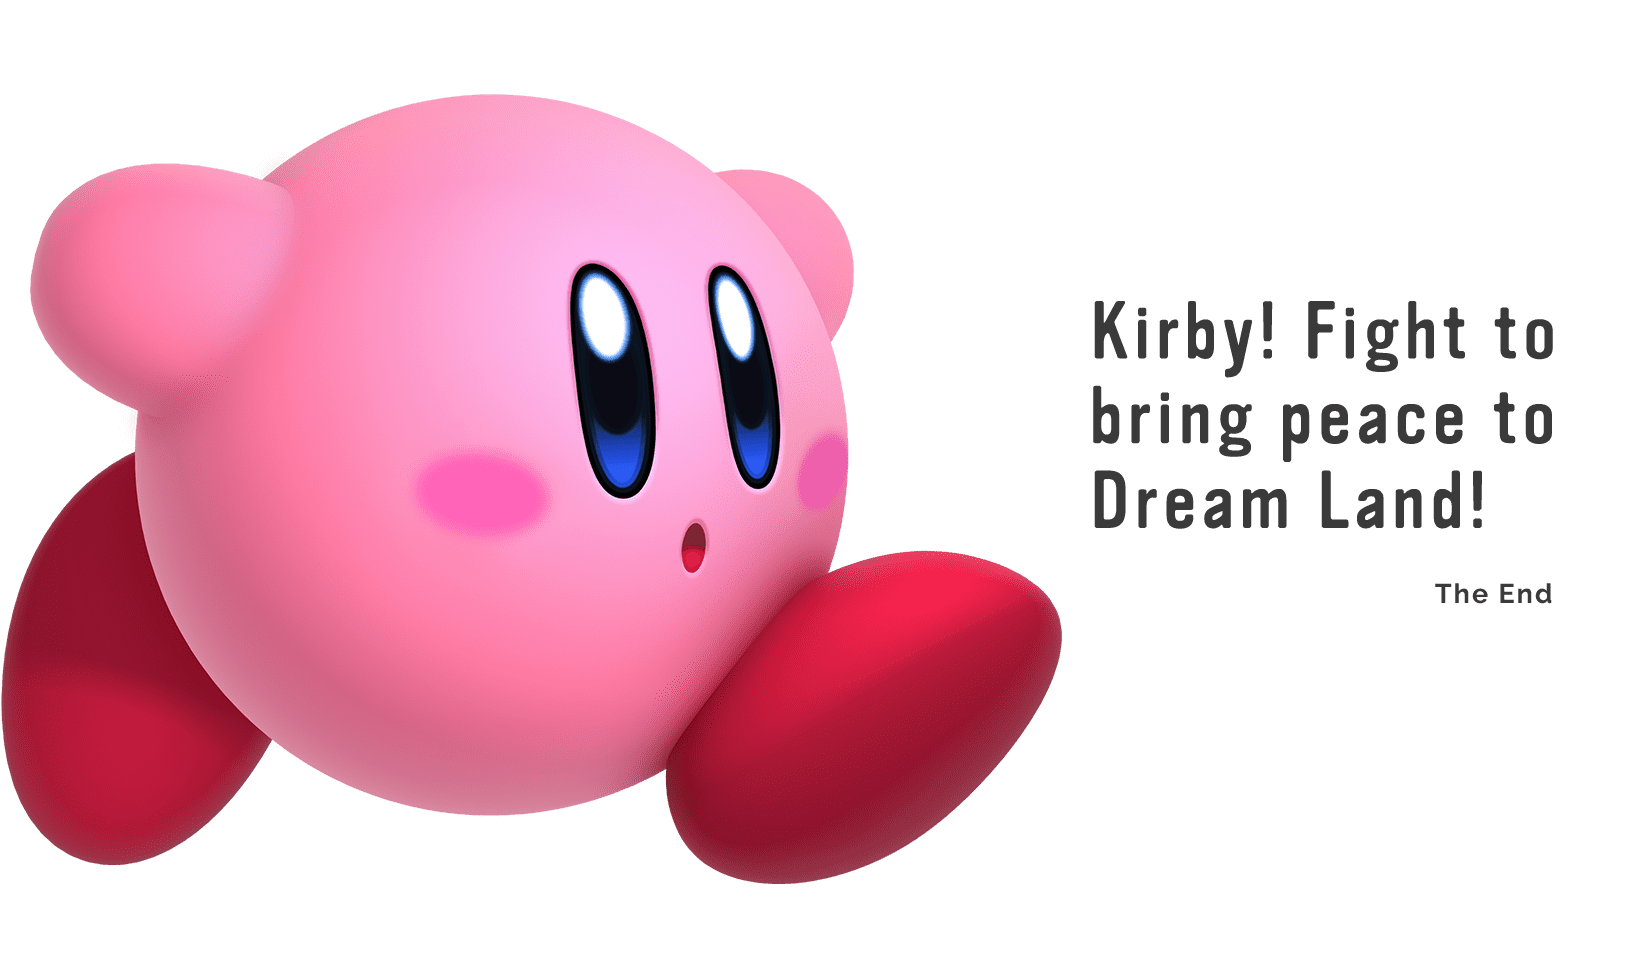 Kirby! Fight to bring peace to Dream Land! The End